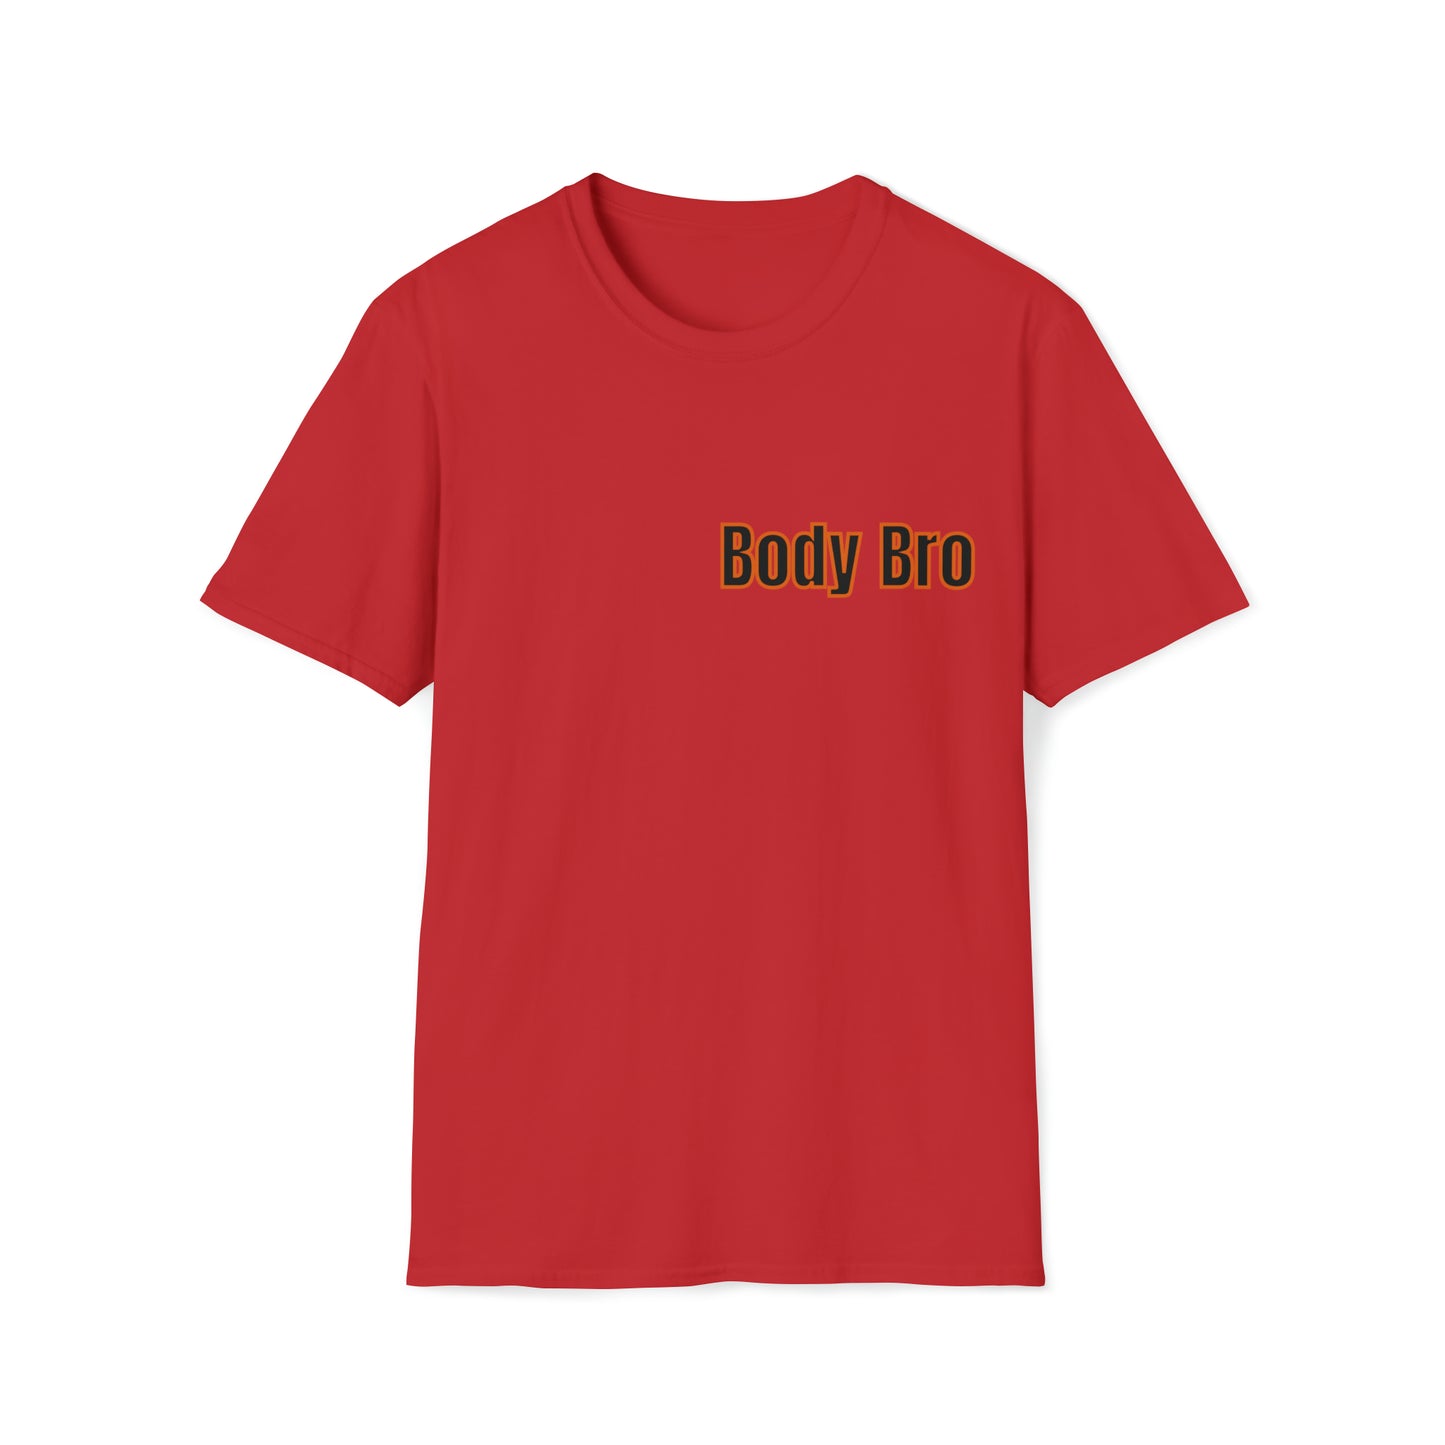 Body Bro Ball Butter Unisex Softstyle T-Shirt, Graphic Tee, Attitude T shirt, Gift for Bro's, Workout Motivation, Cozy Urban Wear, Stylish Unique top, Trendy outerwear